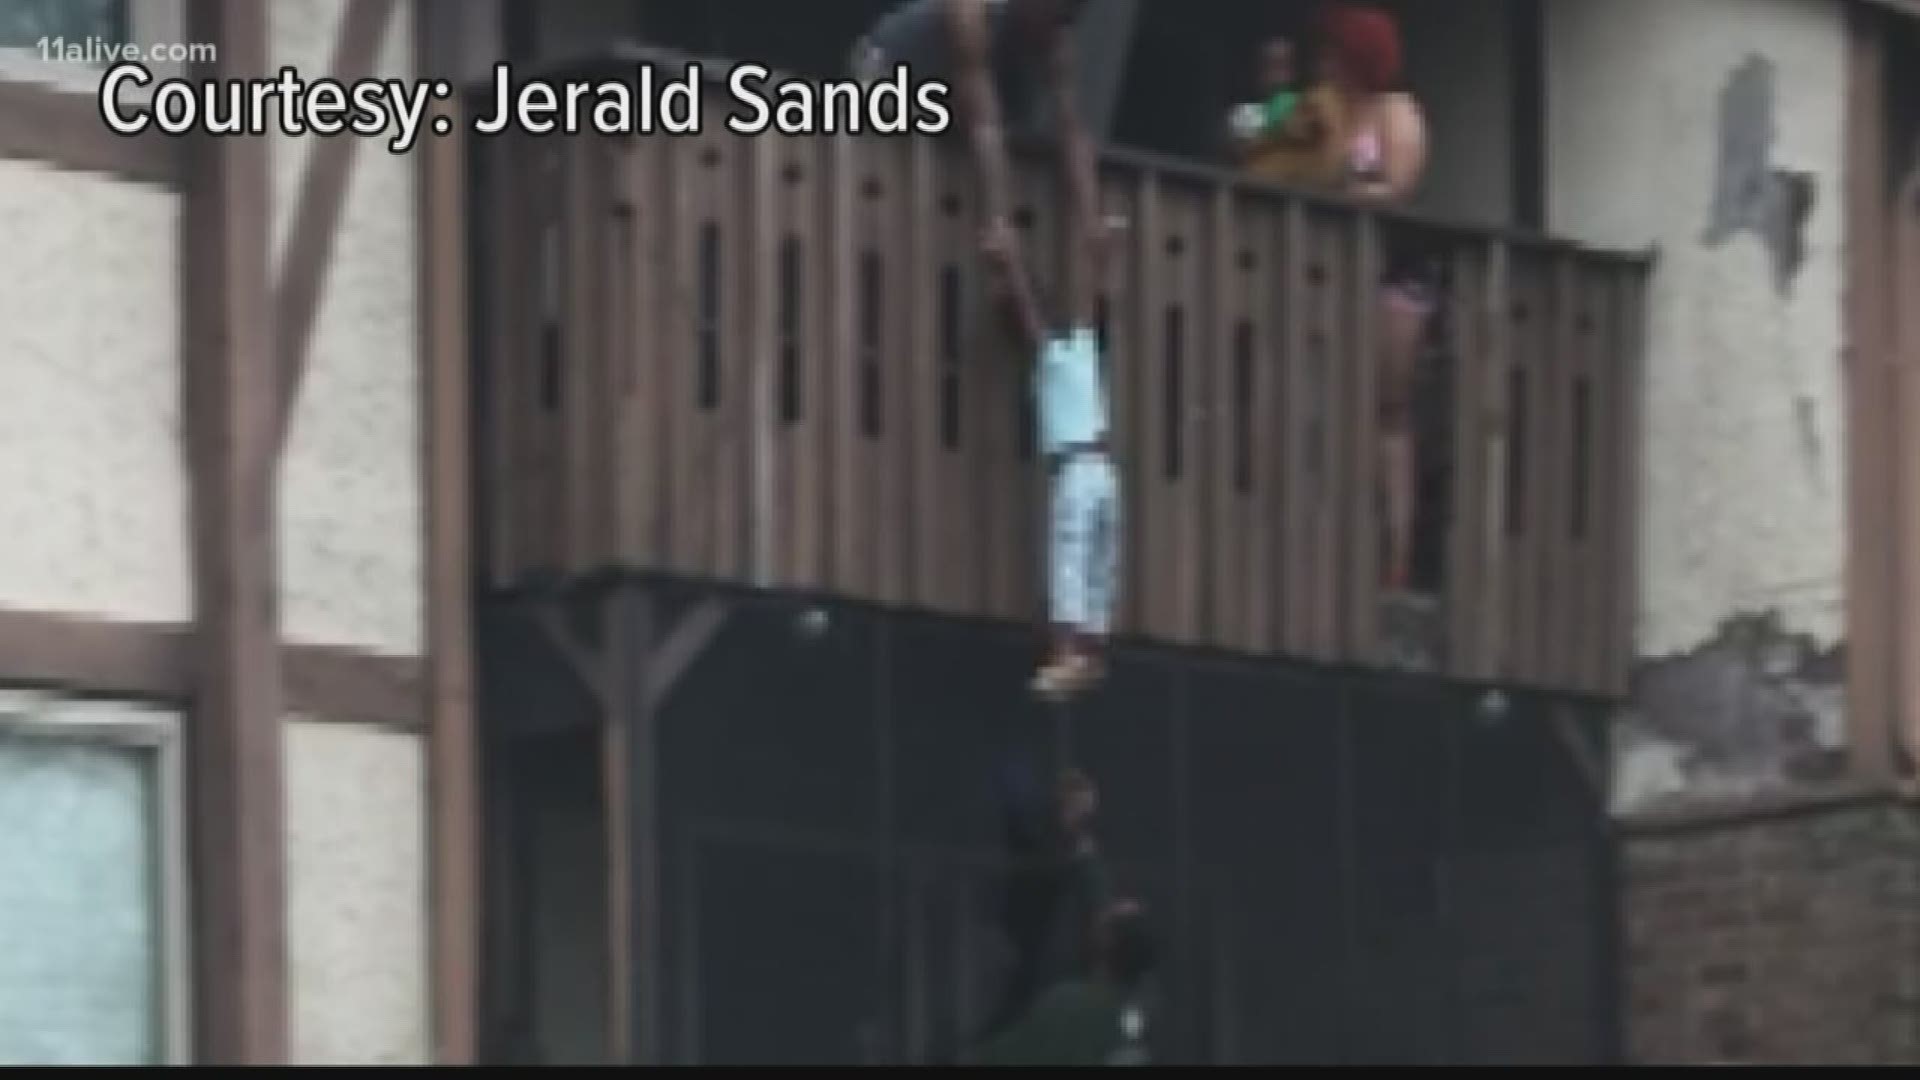 Video shows people jumping in to help.